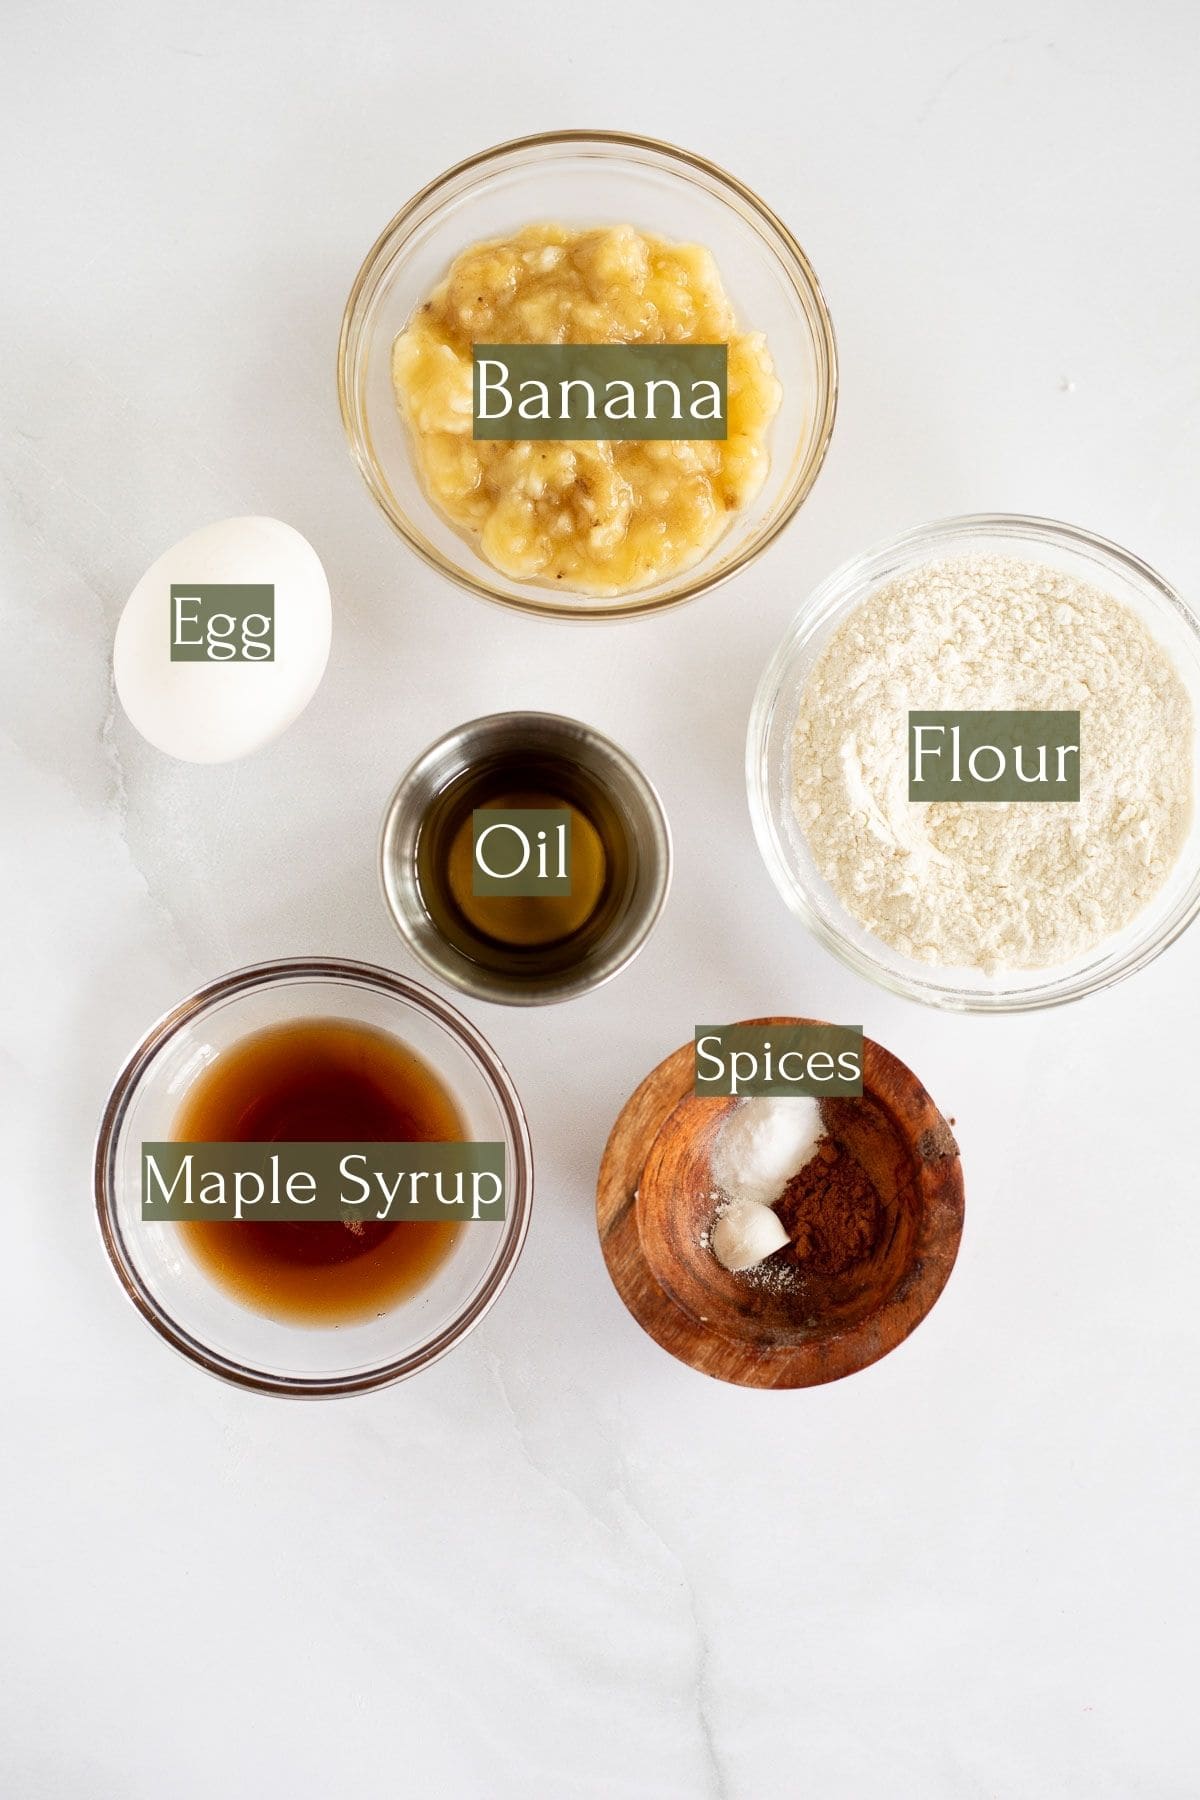 ingredients to make banana bread for one labeled with green text.